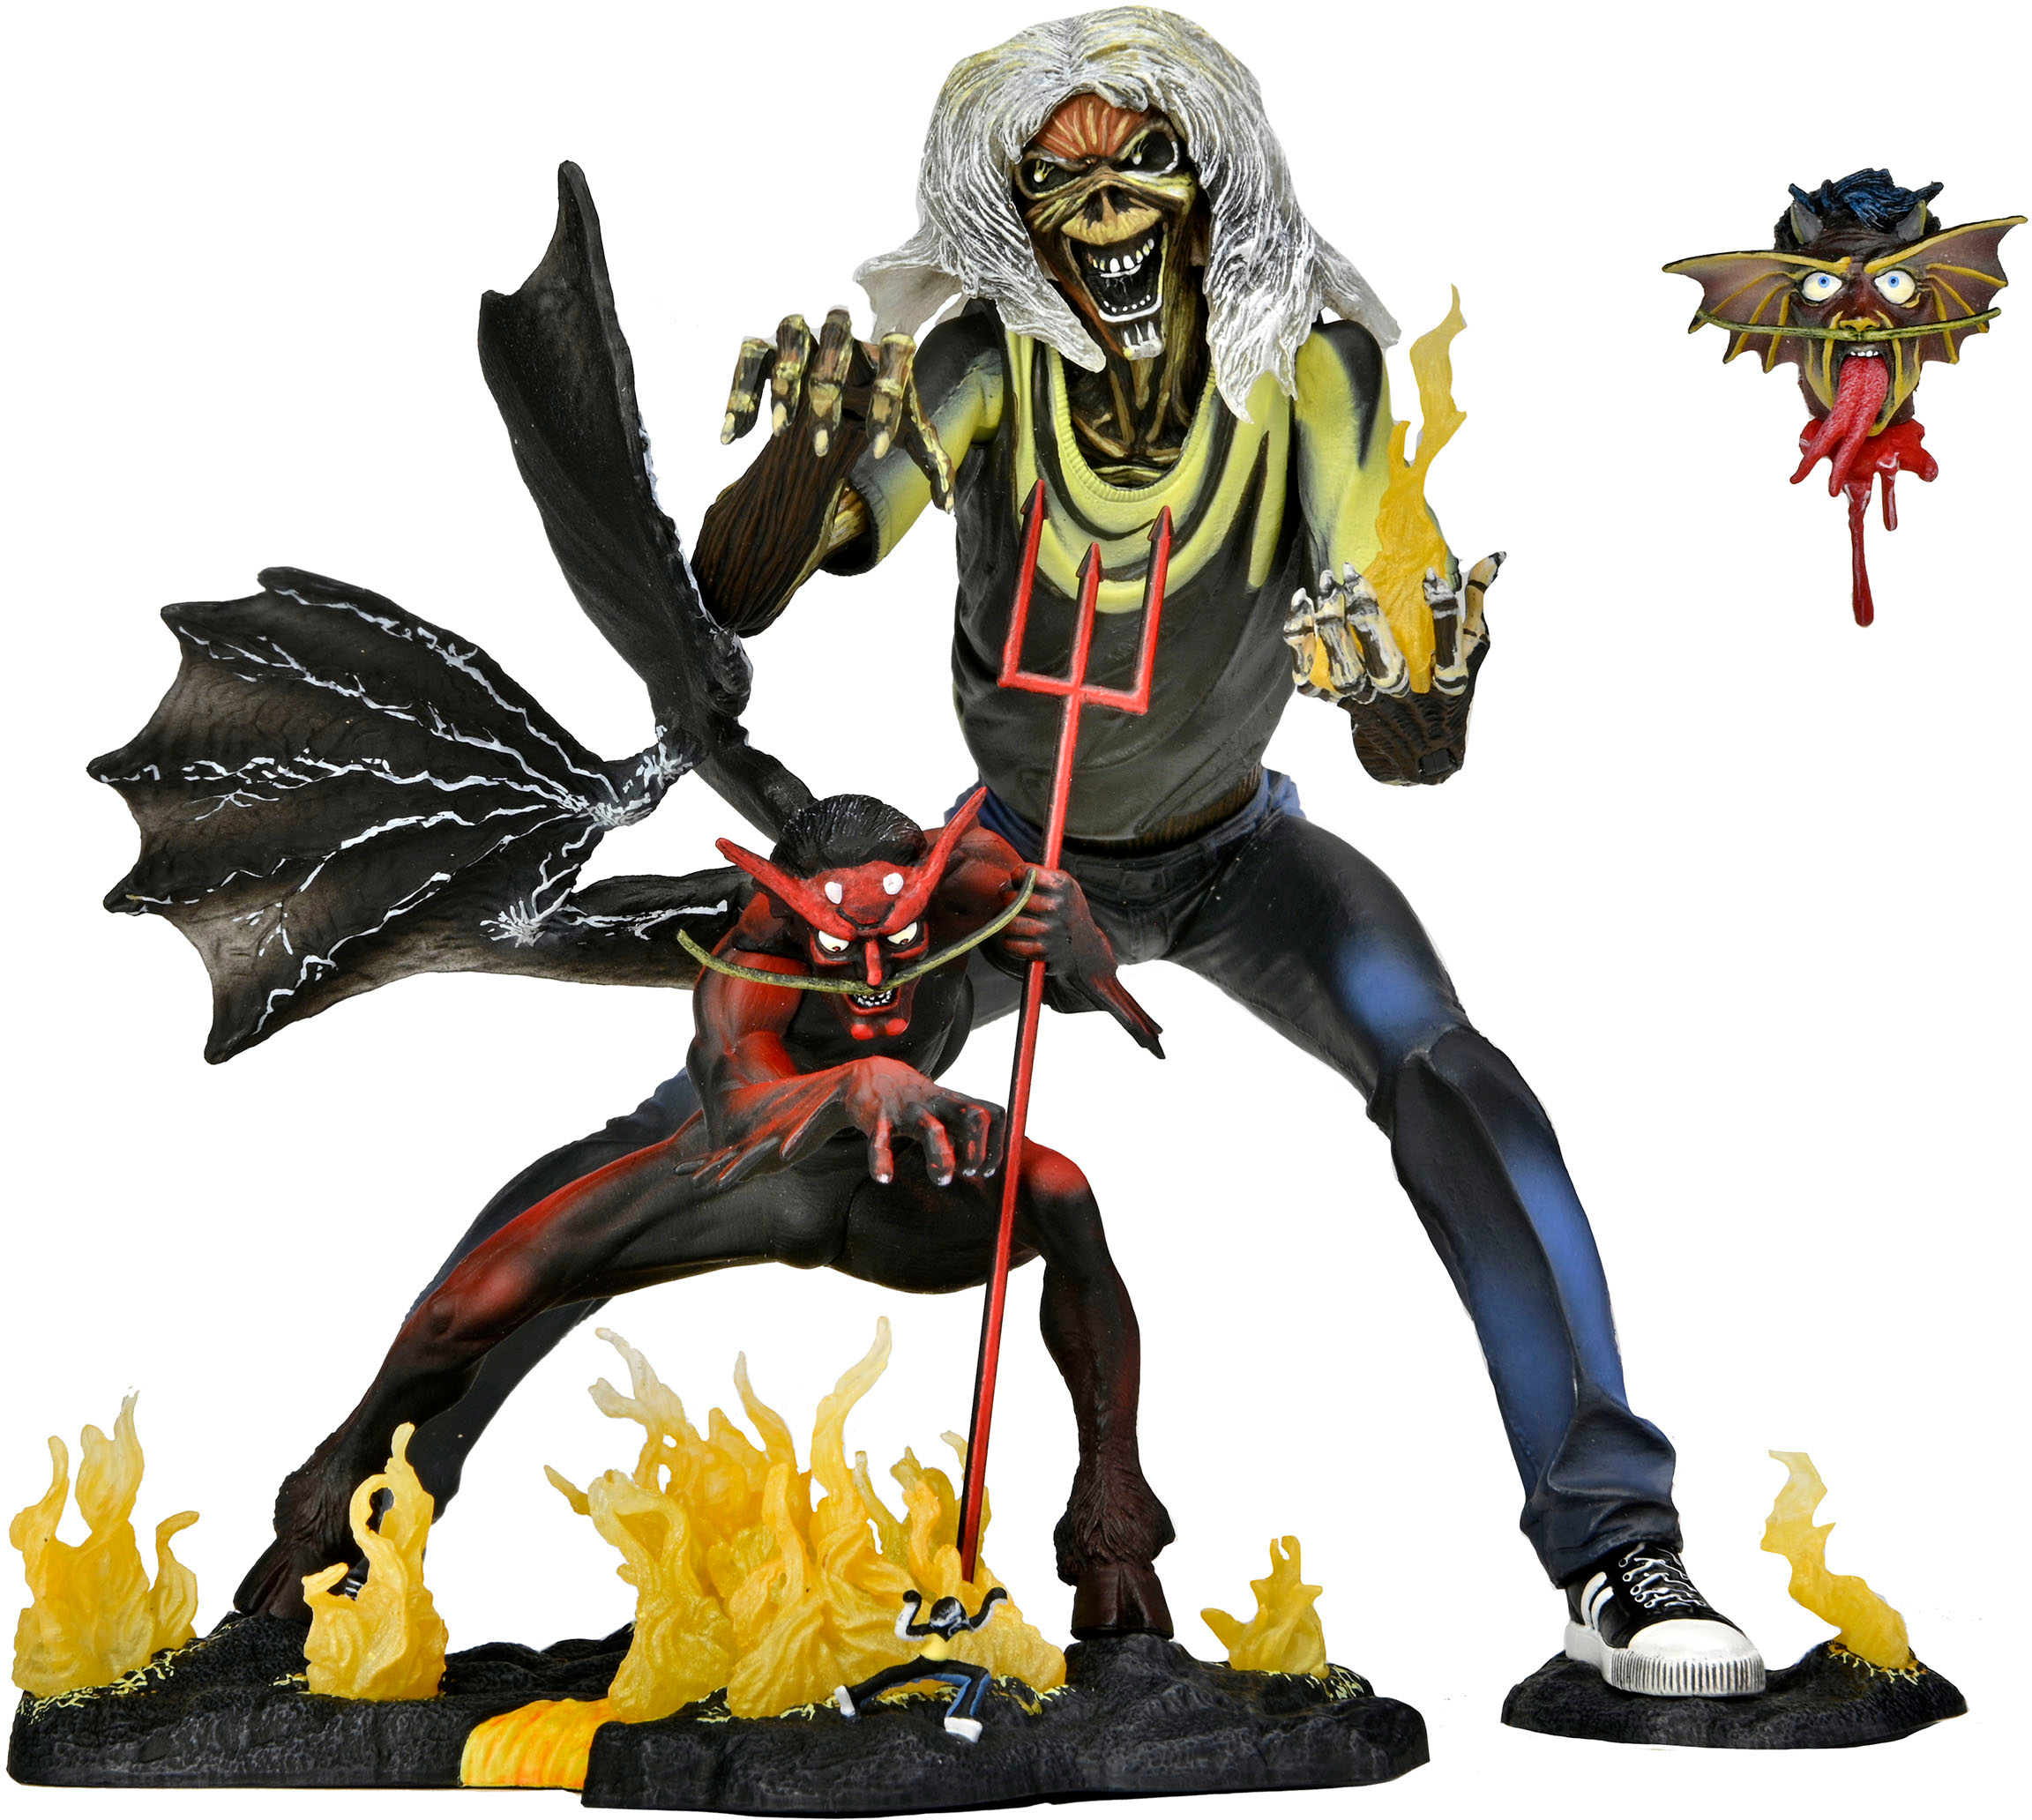 NECA - Iron Maiden - 7" Scale Action Figure Set – Ultimate Number of the Beast (40th Anniversary)